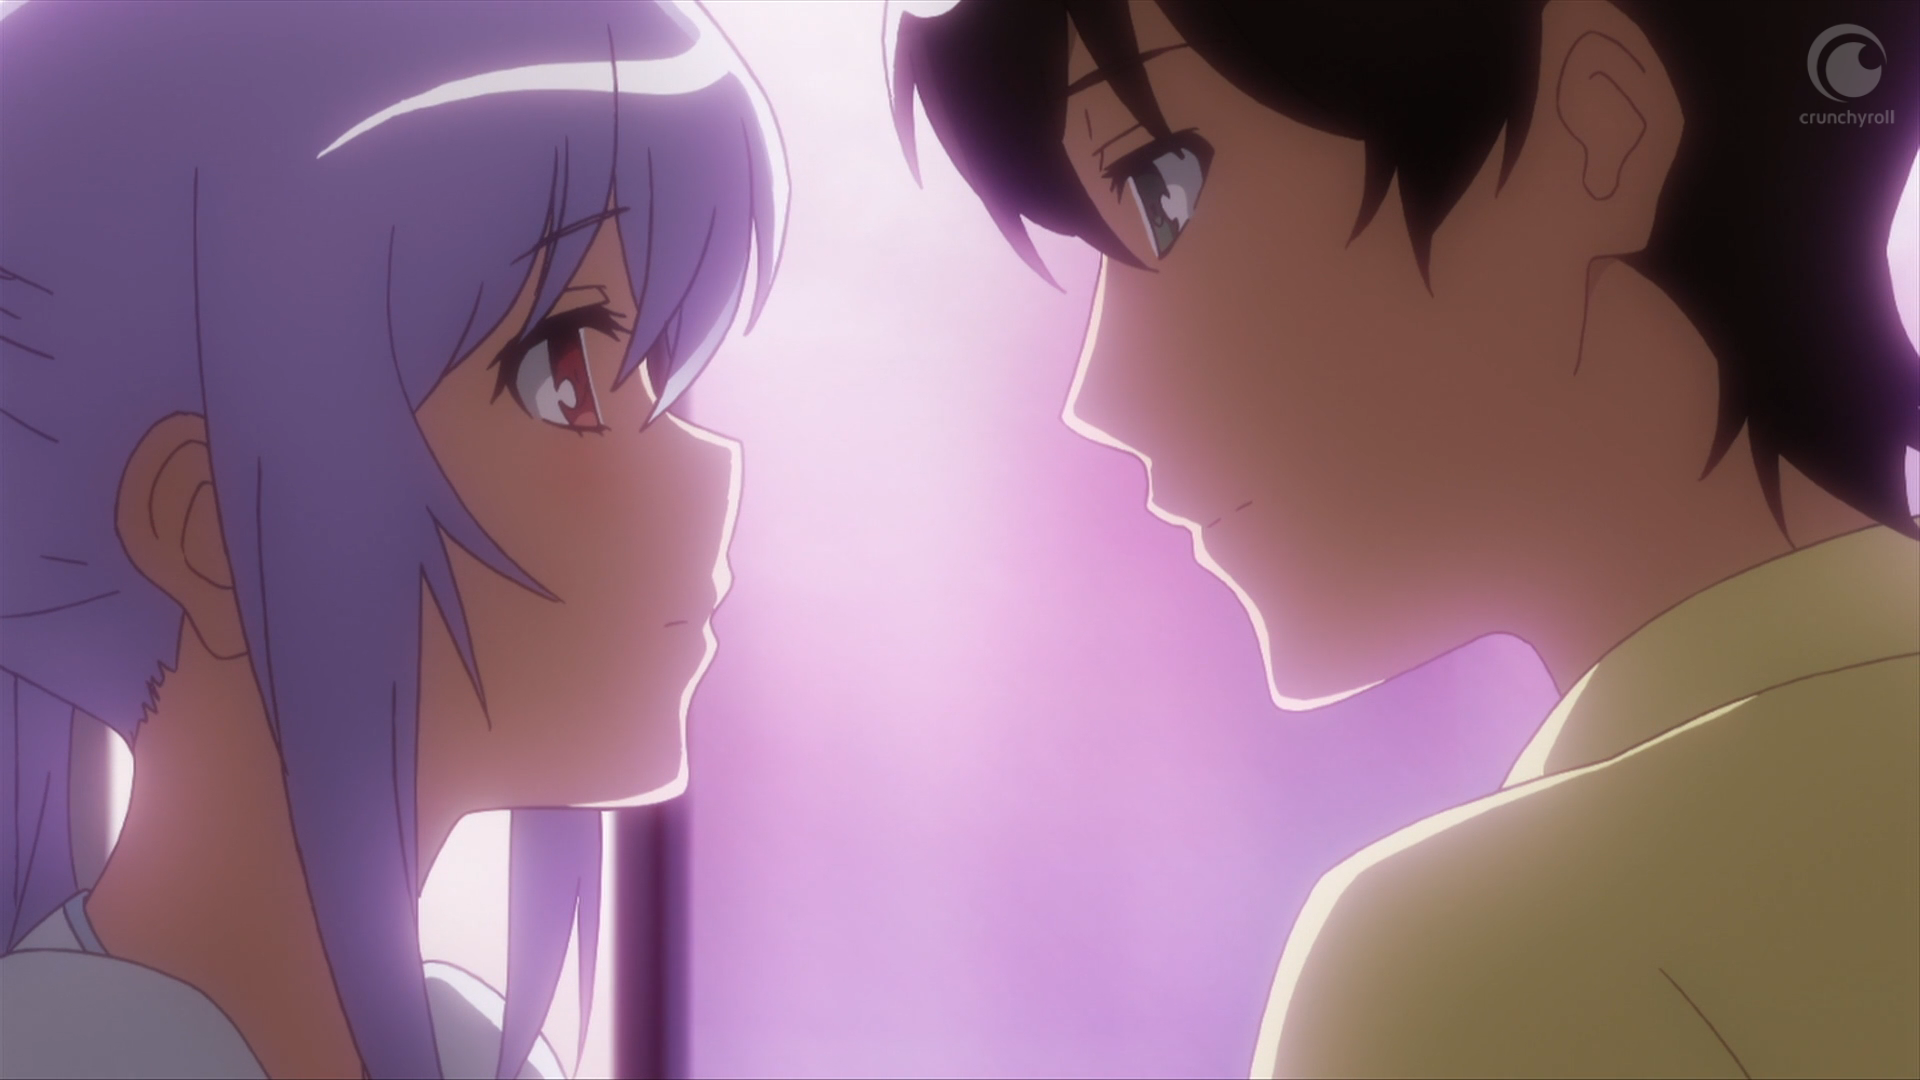 Does Plastic Memories Have Pacing Problems? - IGN